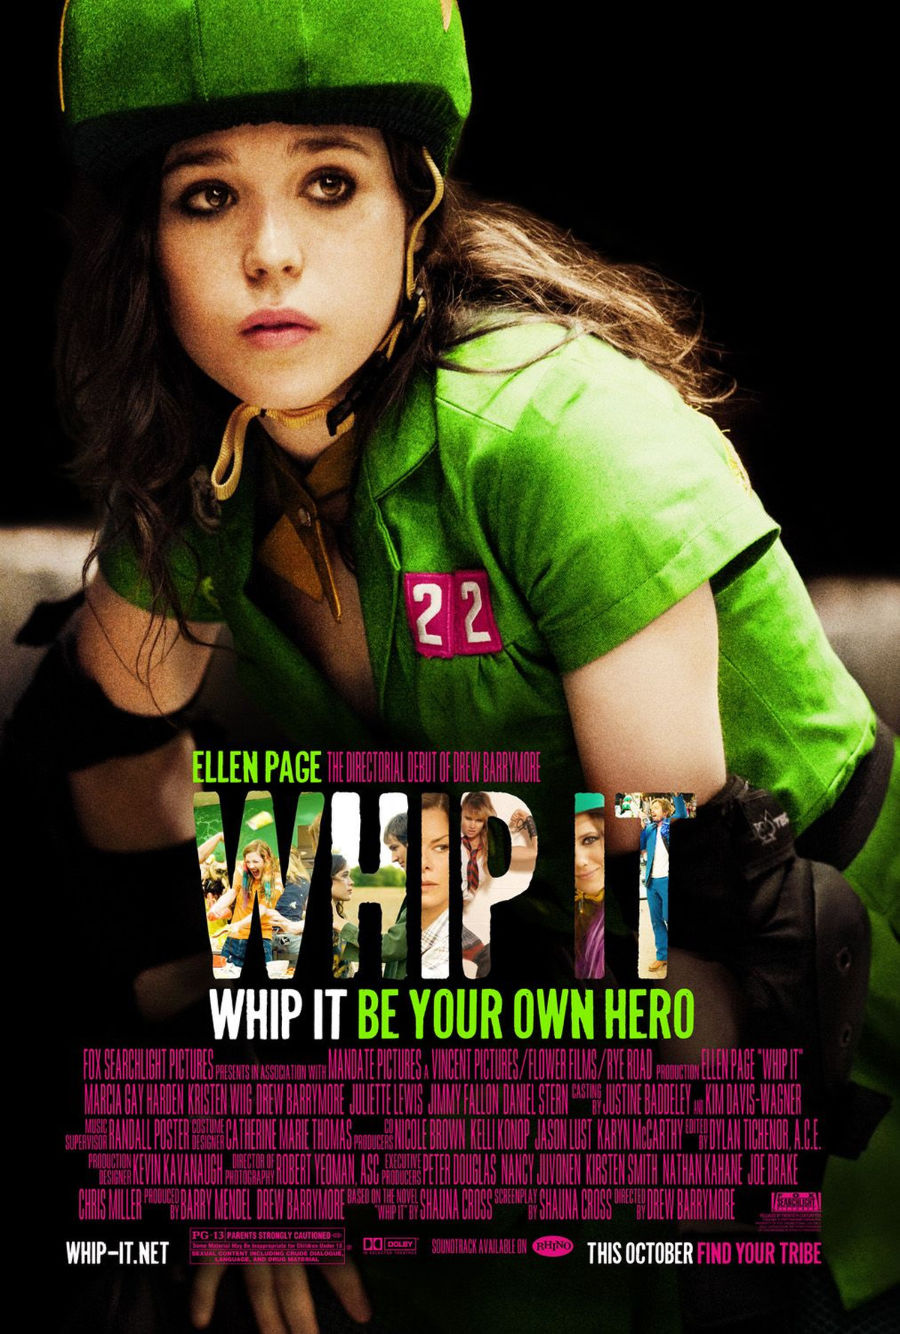 You are currently viewing Notes On A Film: Whip It